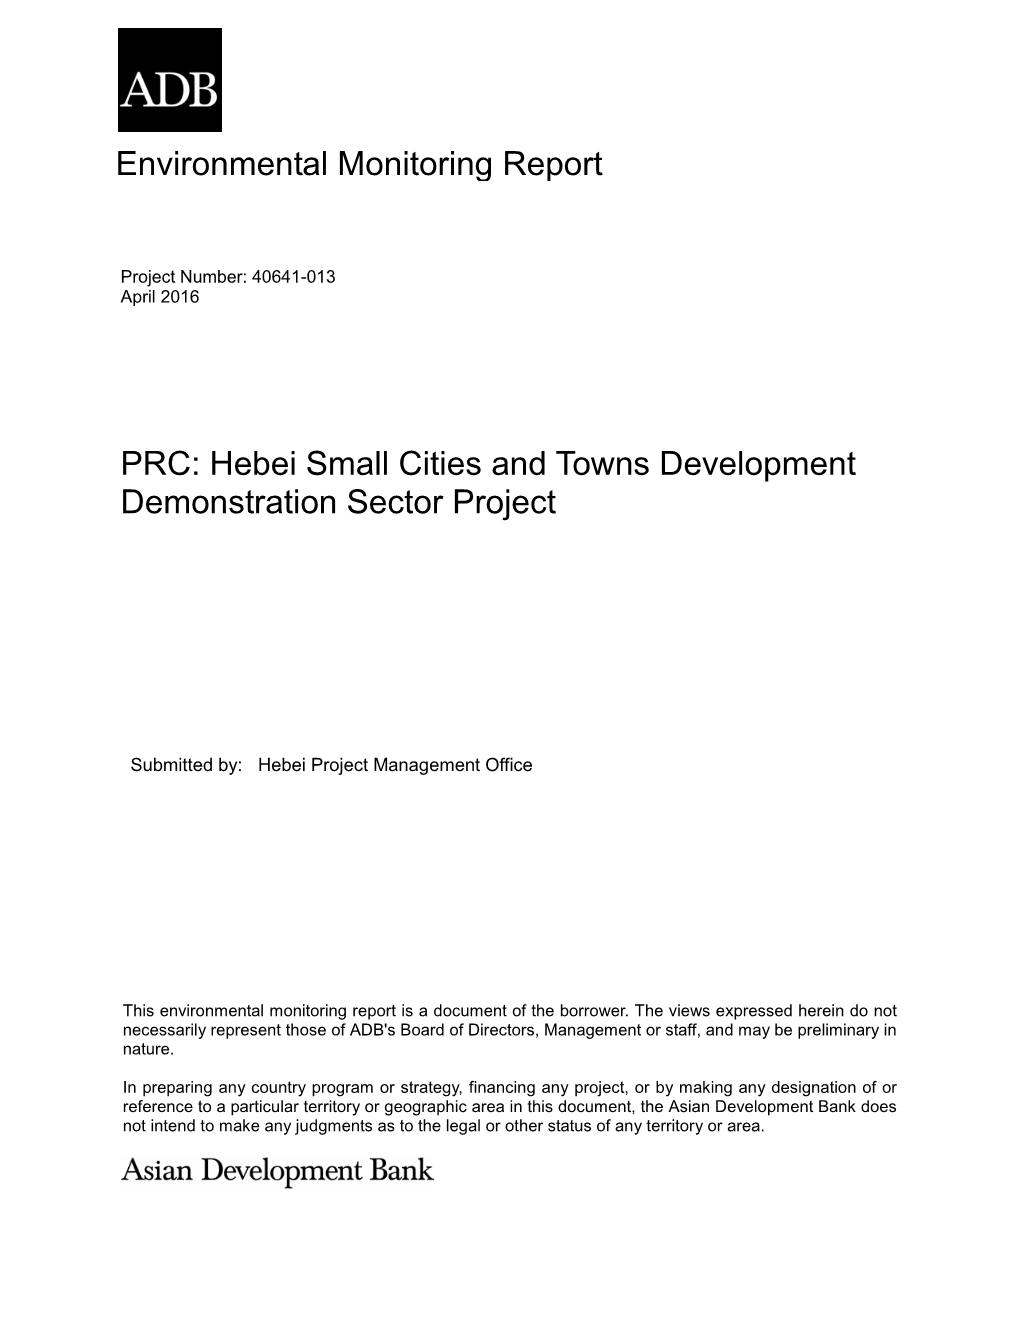 Hebei Small Cities and Towns Development Demonstration Sector Project